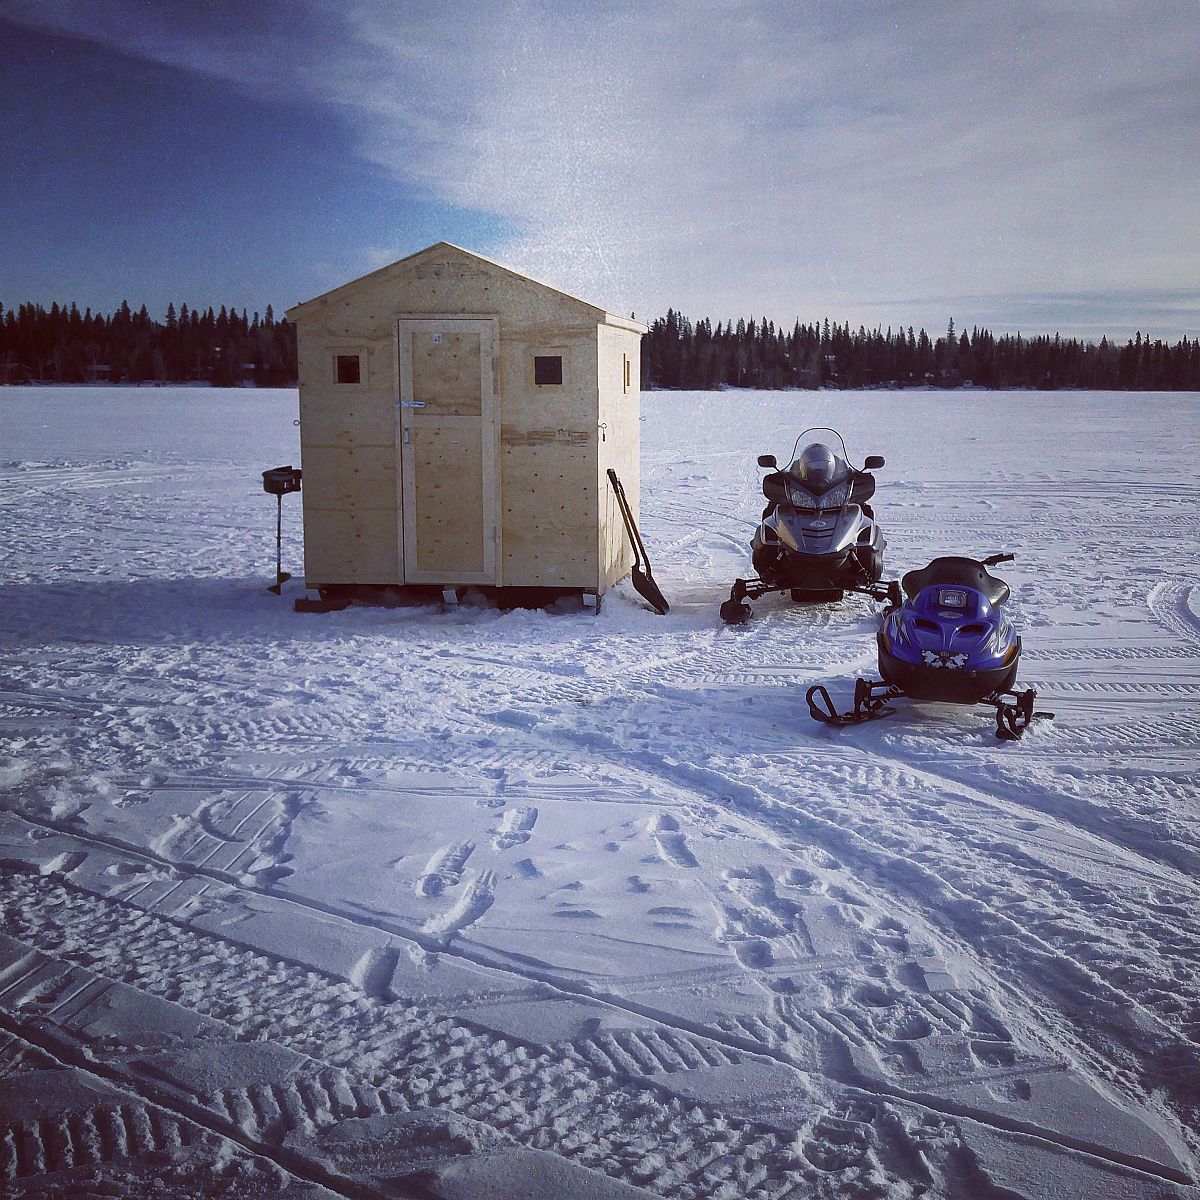 The sleds resting by the ice fishing shack